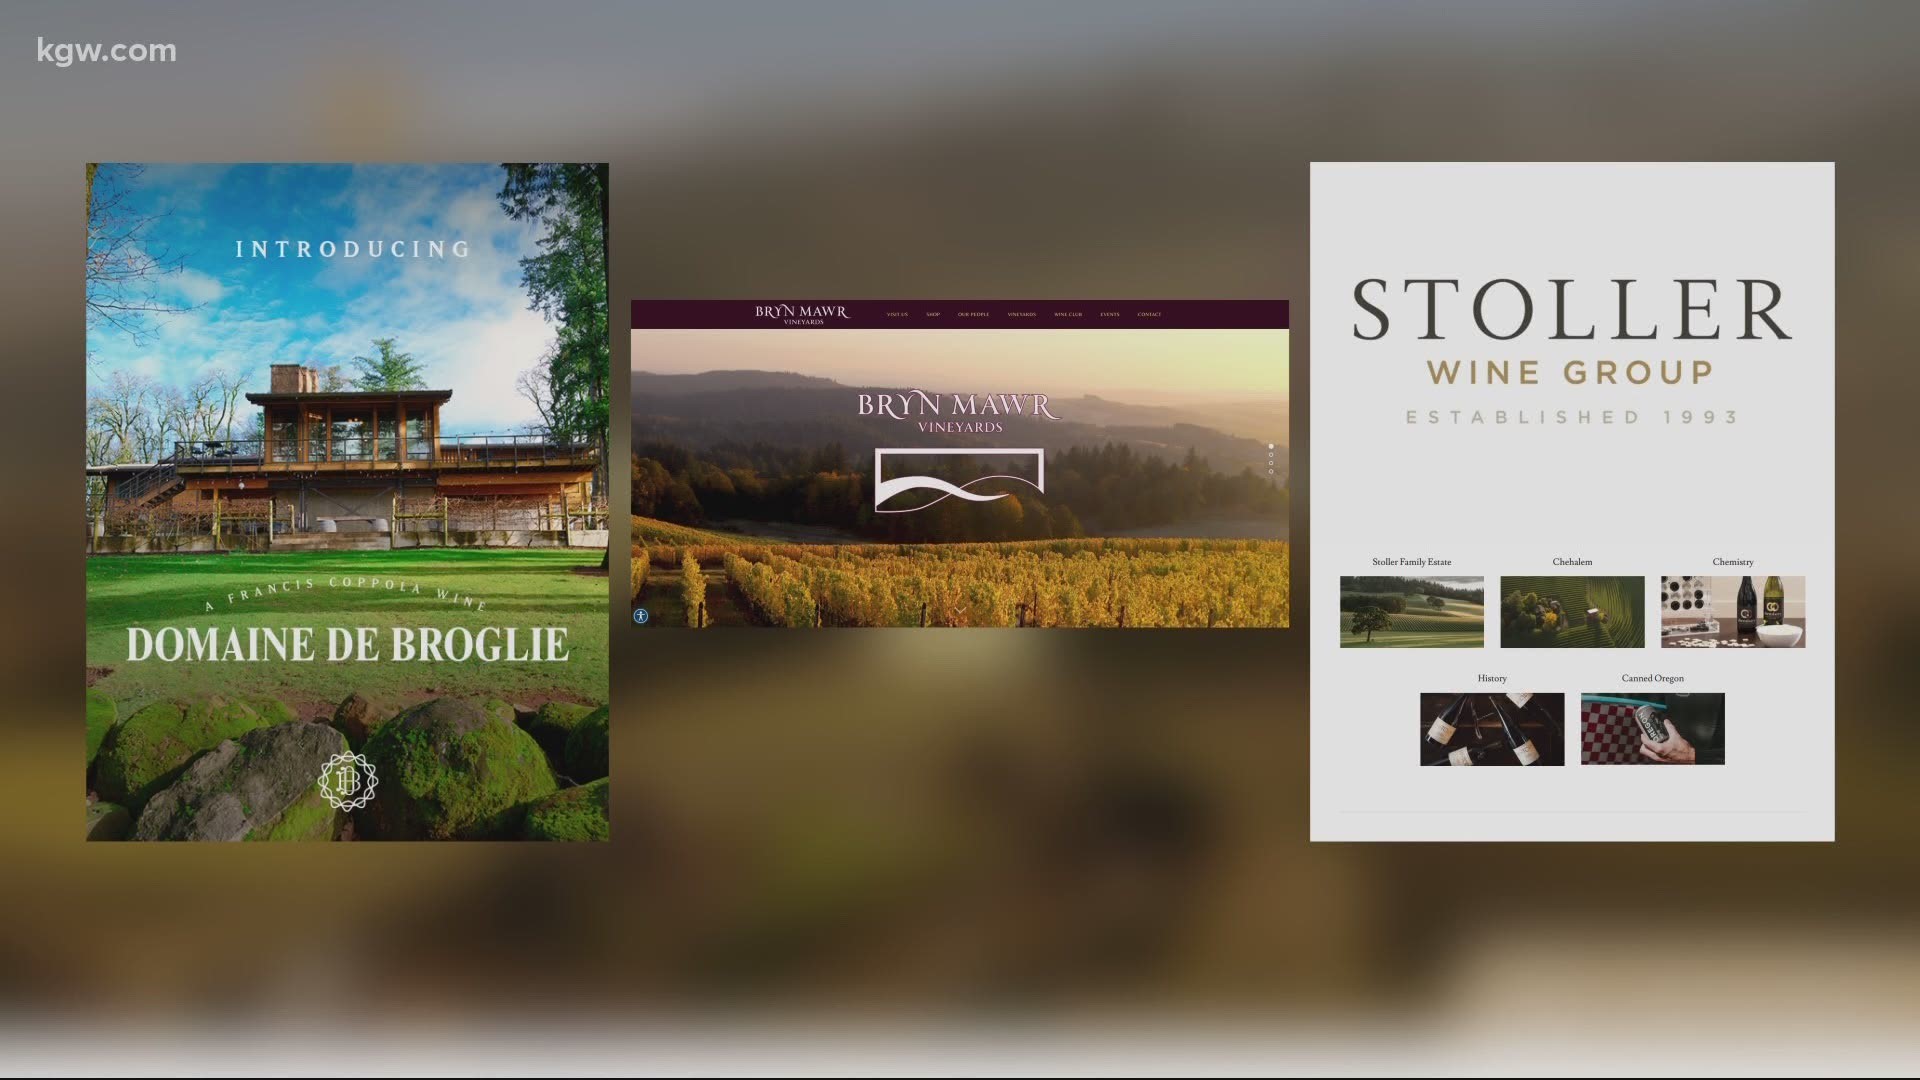 After learning the couples' wedding plans were ruined, three Oregon wineries stepped up to help bring the magic back to their special days.
YouTube: KGW News